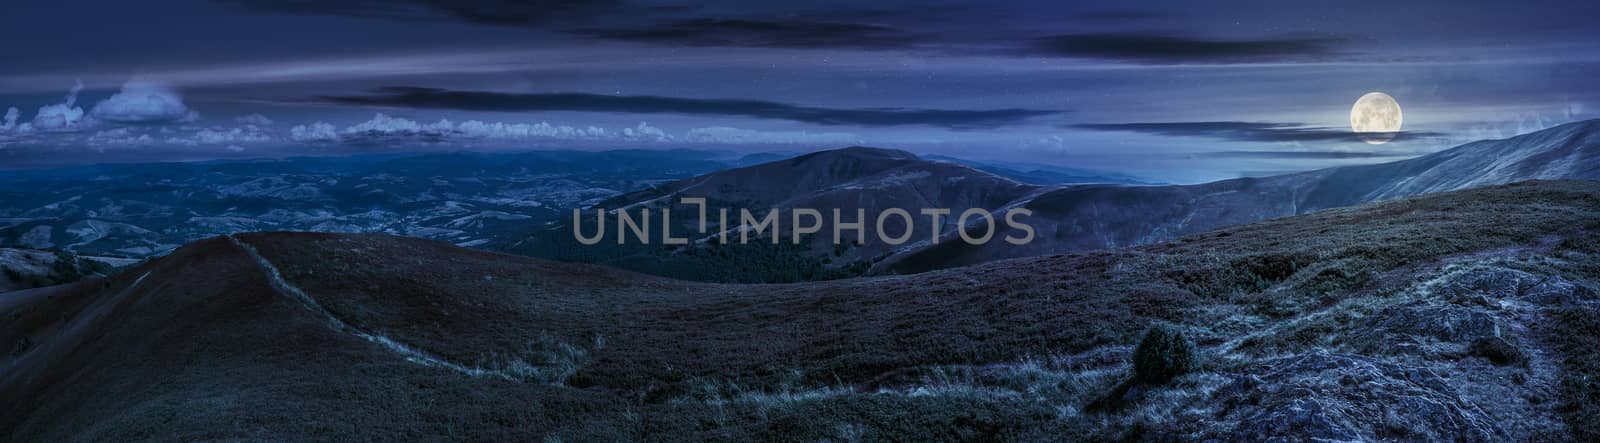 panoramic summer landscape in Carpathians at night by Pellinni